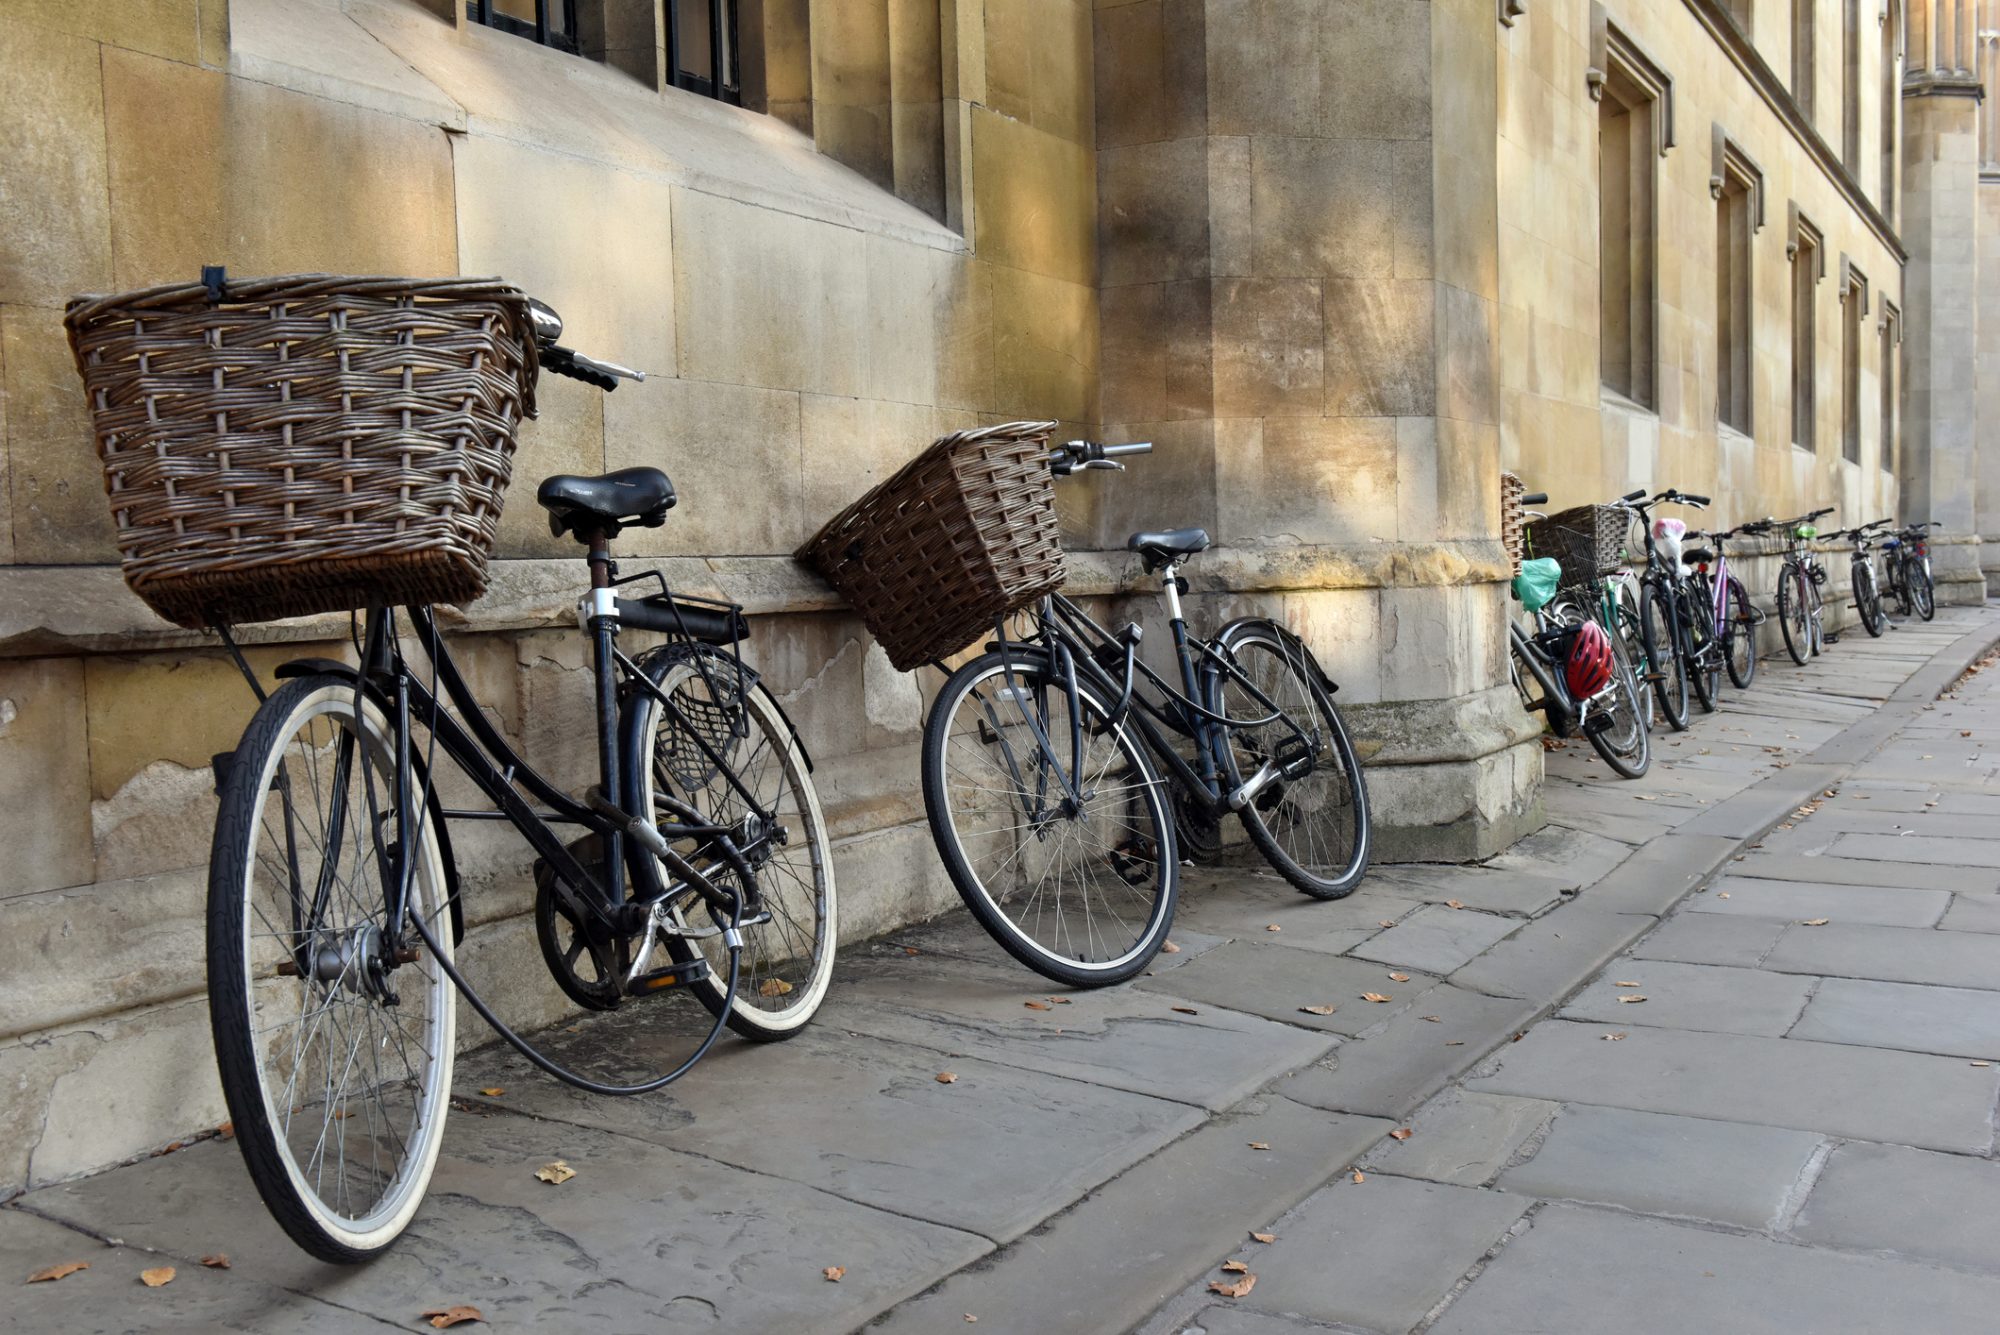 Traditional bicycles with baskets parked by students in a Cambridge street near a college